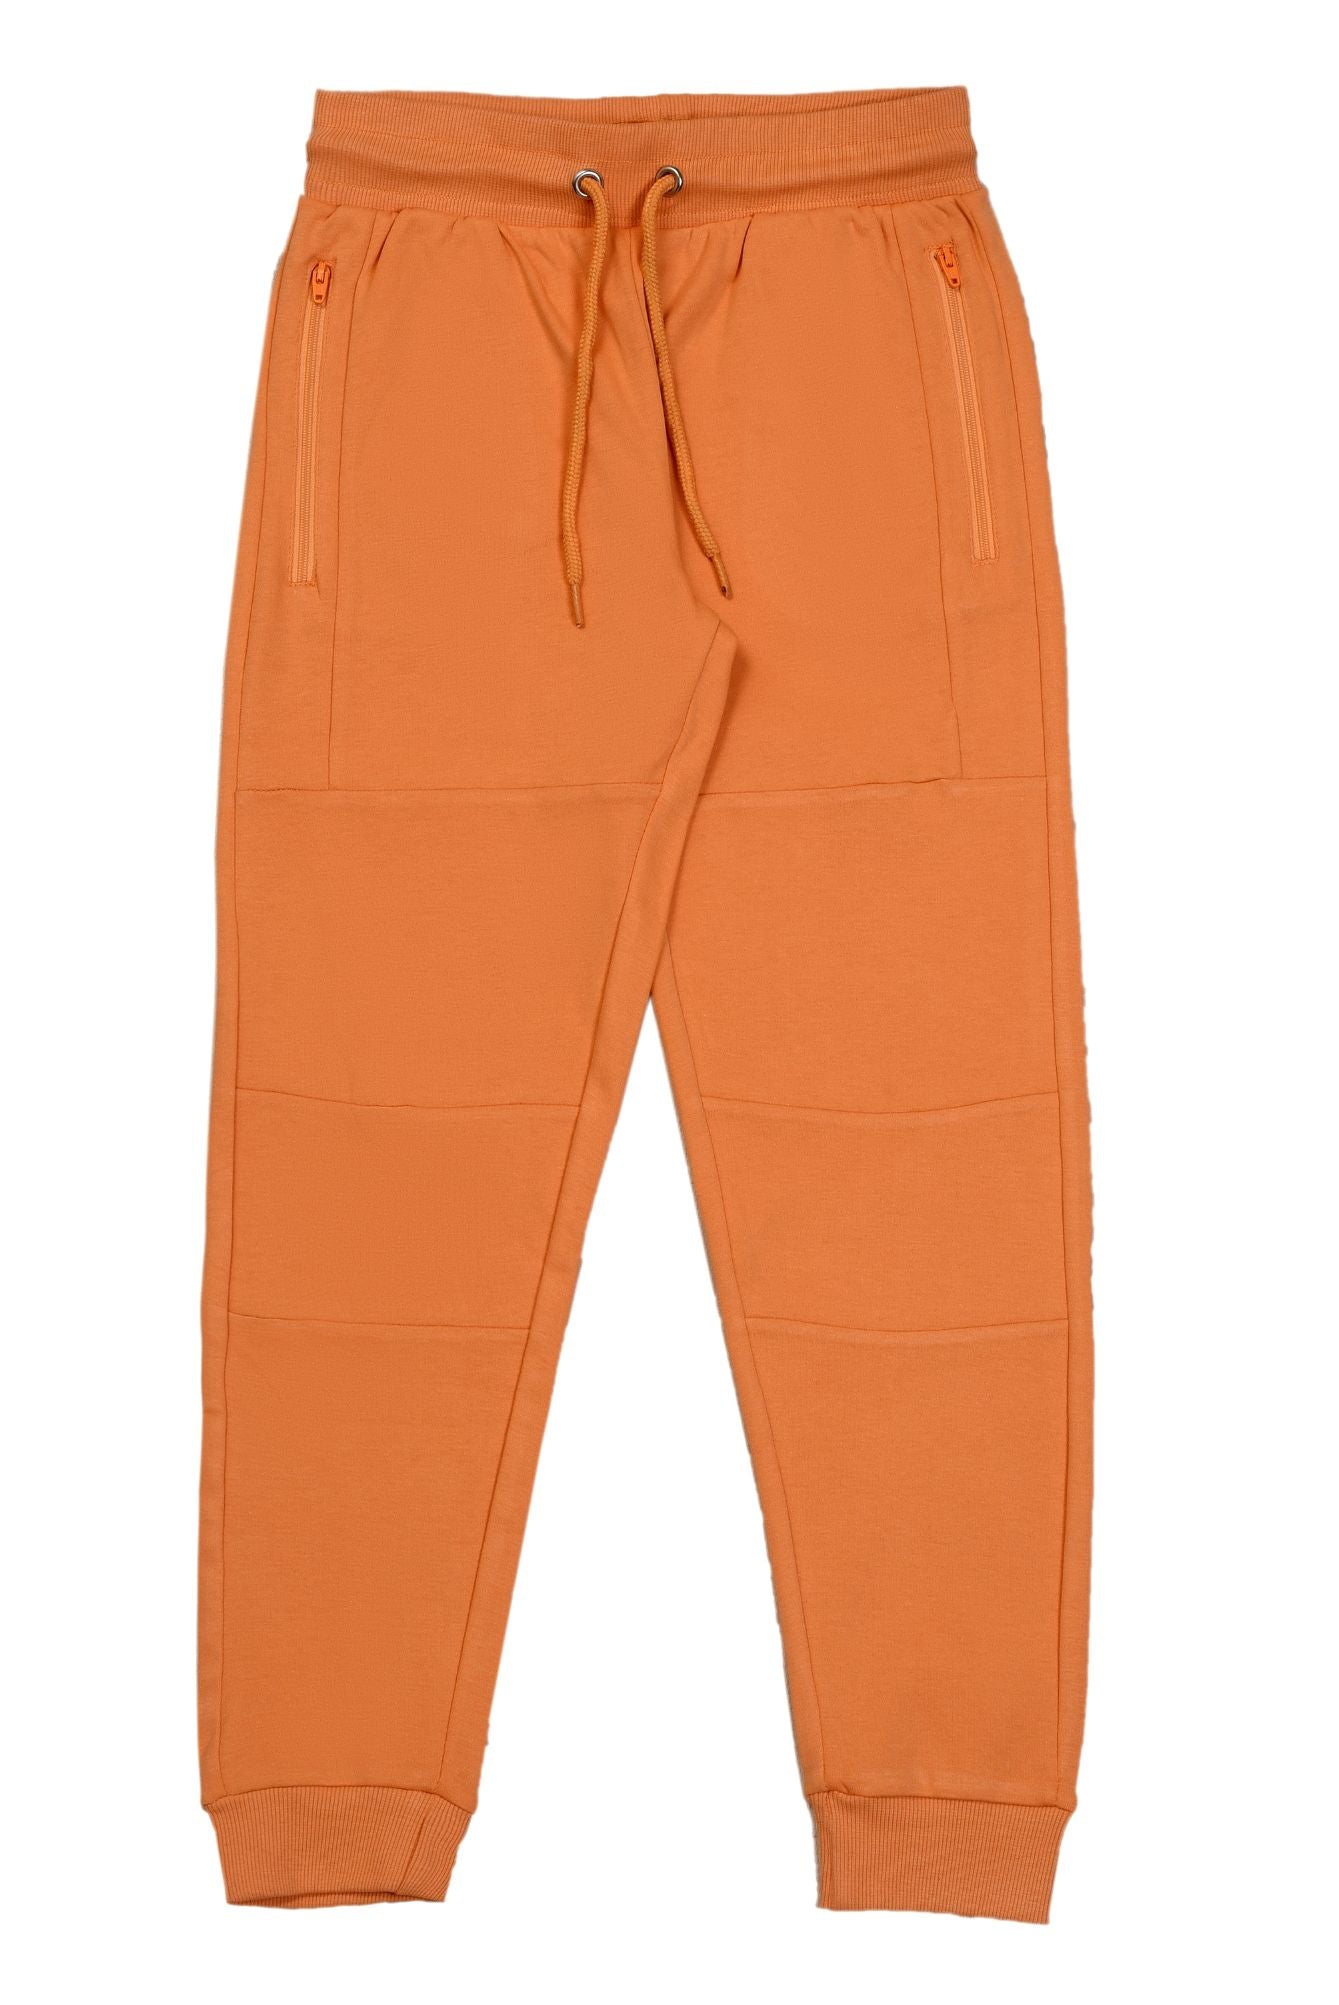 KDS-GC-12416 PULL ON TROUSER PEACH